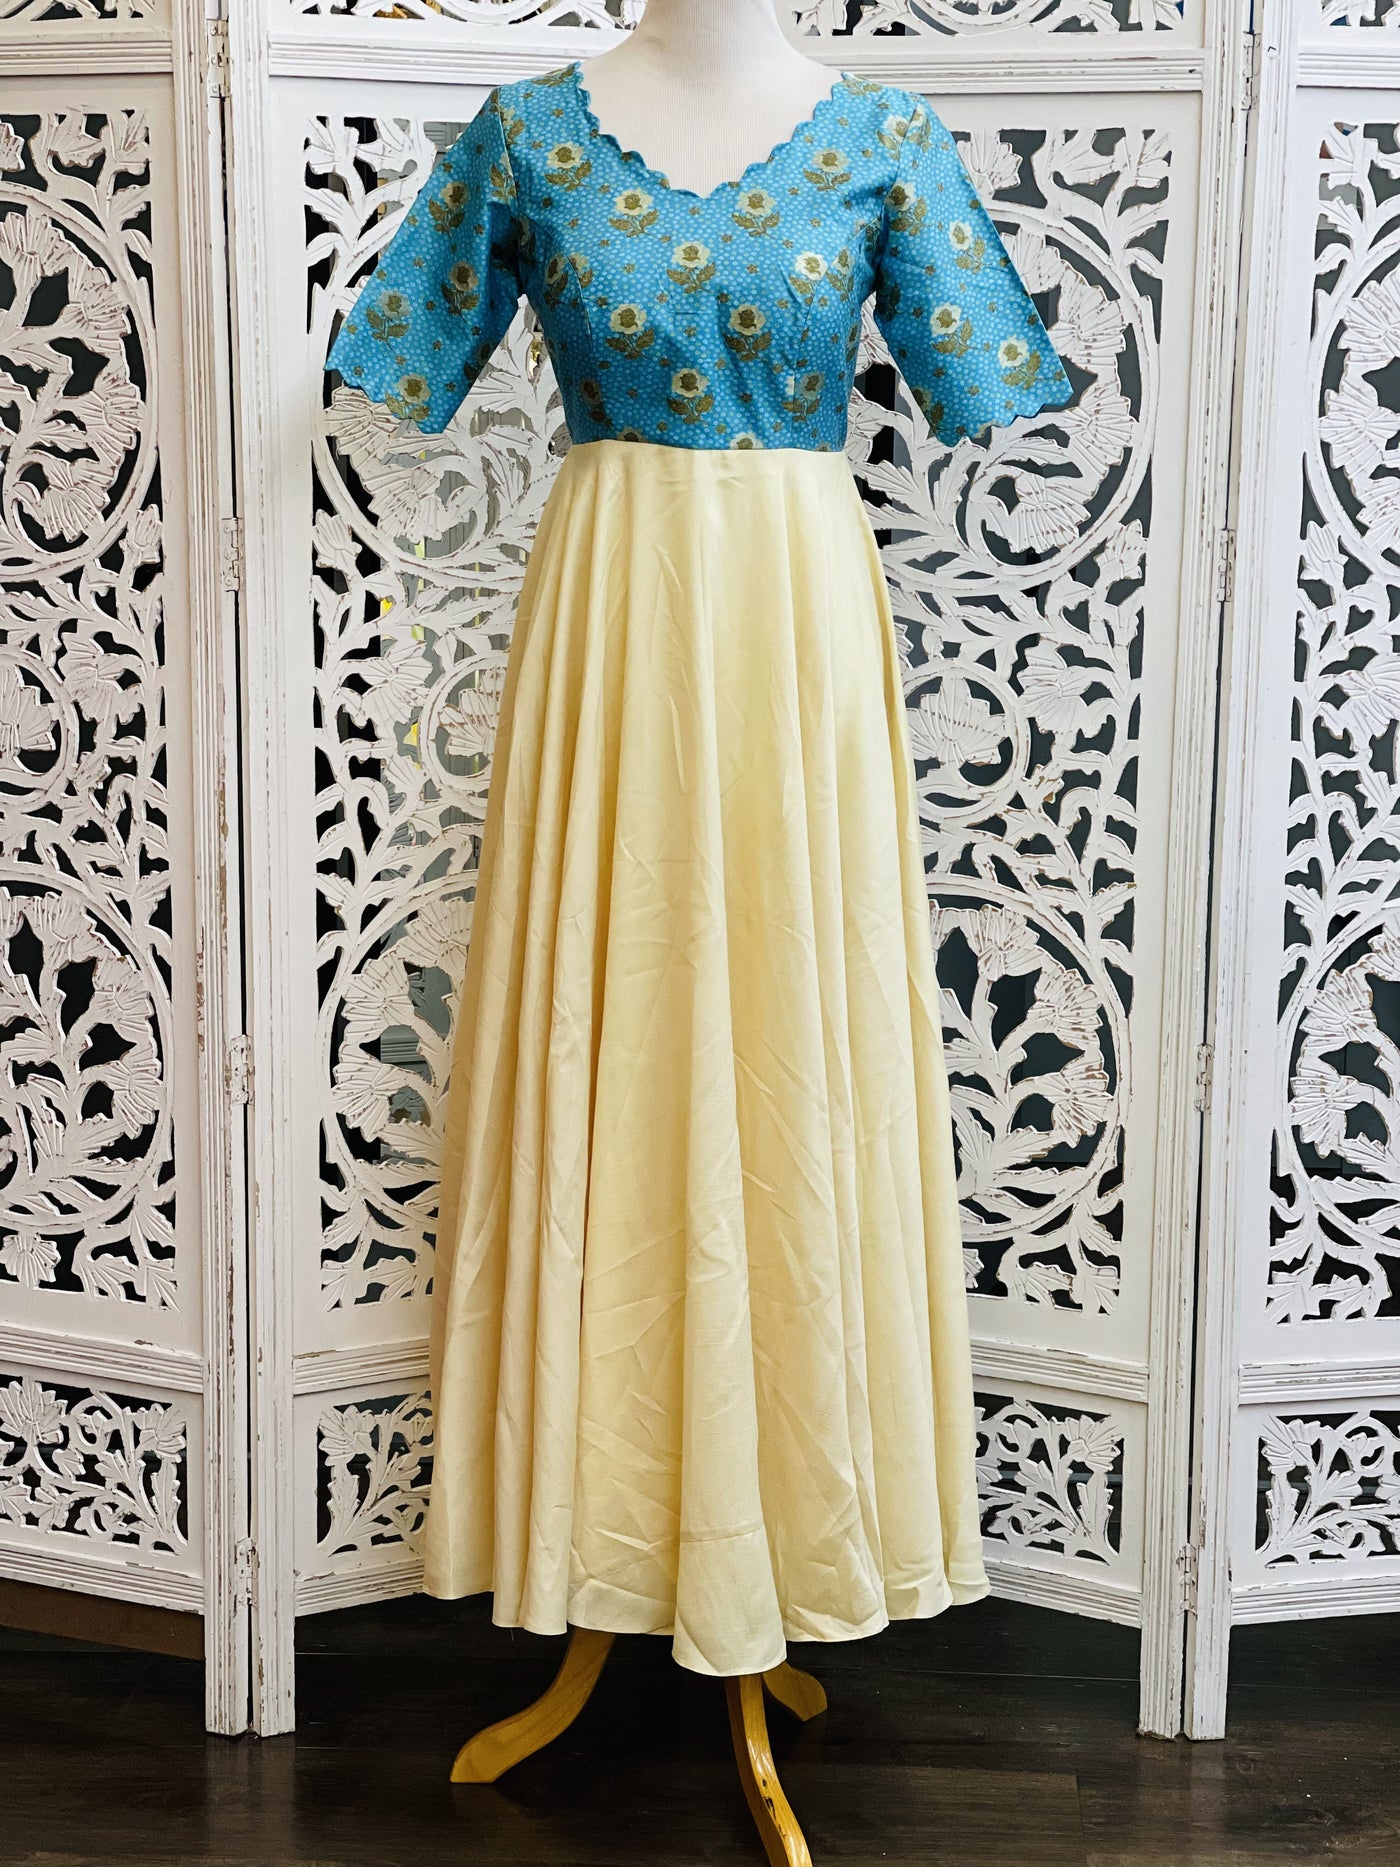 Party wear look gown with long koti